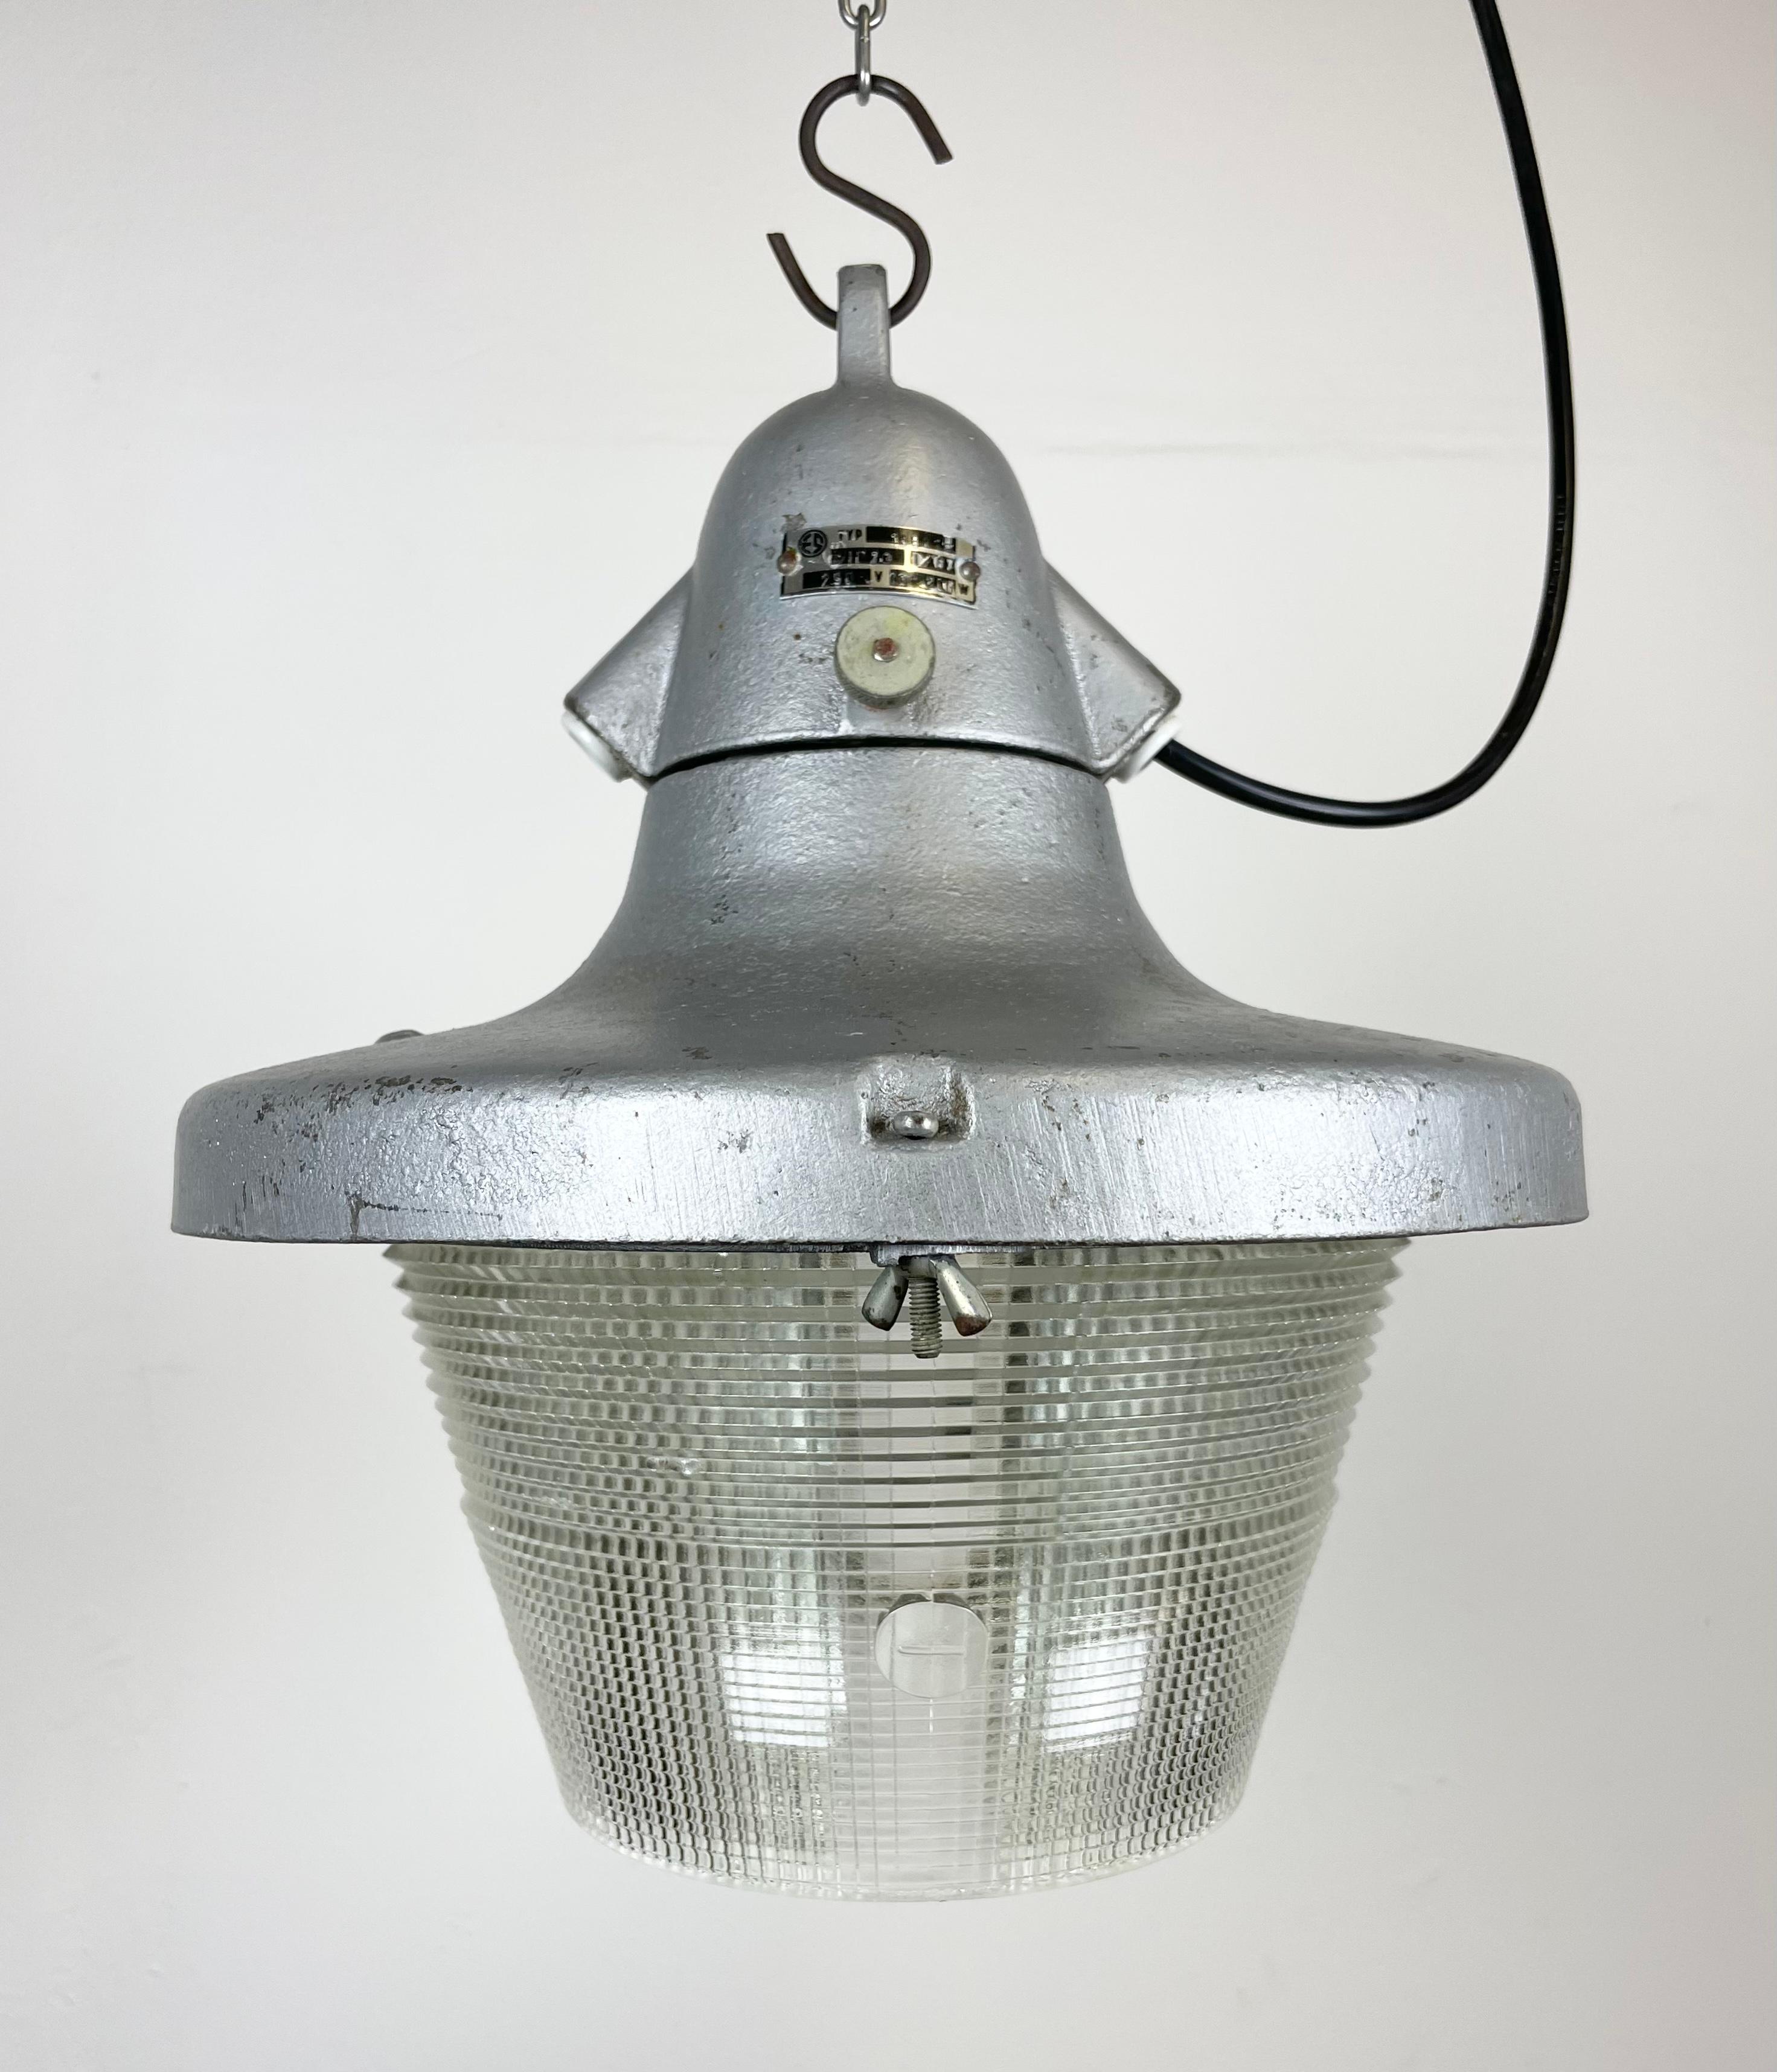 Czech Industrial Silver Cast Aluminium Light with Striped Glass, 1950s For Sale